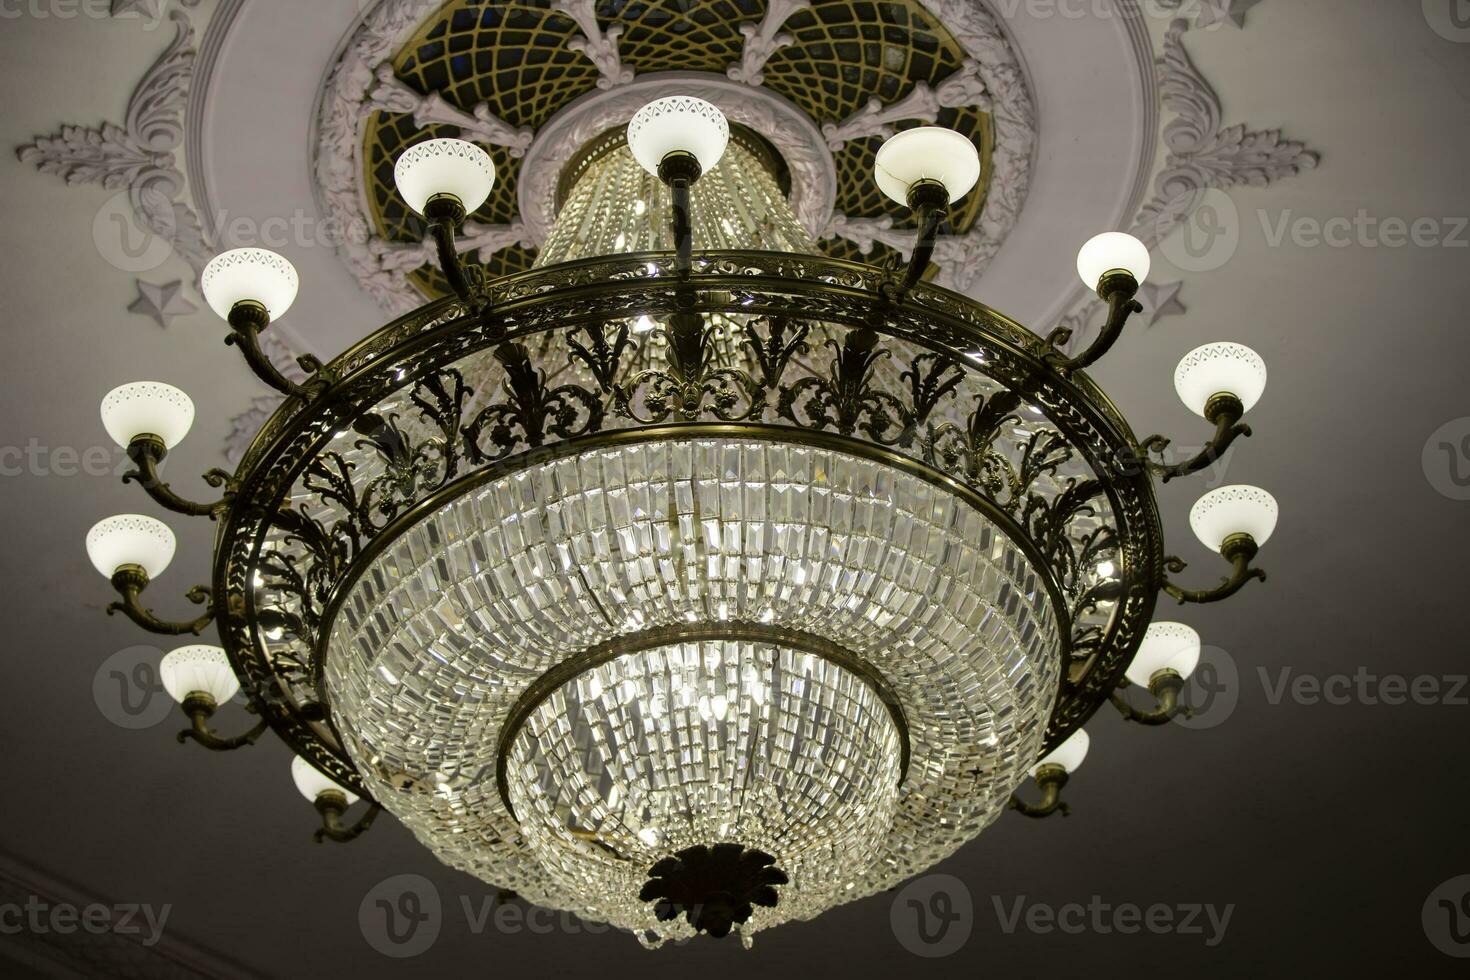 There is a beautiful theater chandelier on the ceiling and an expensive glass lamp. photo